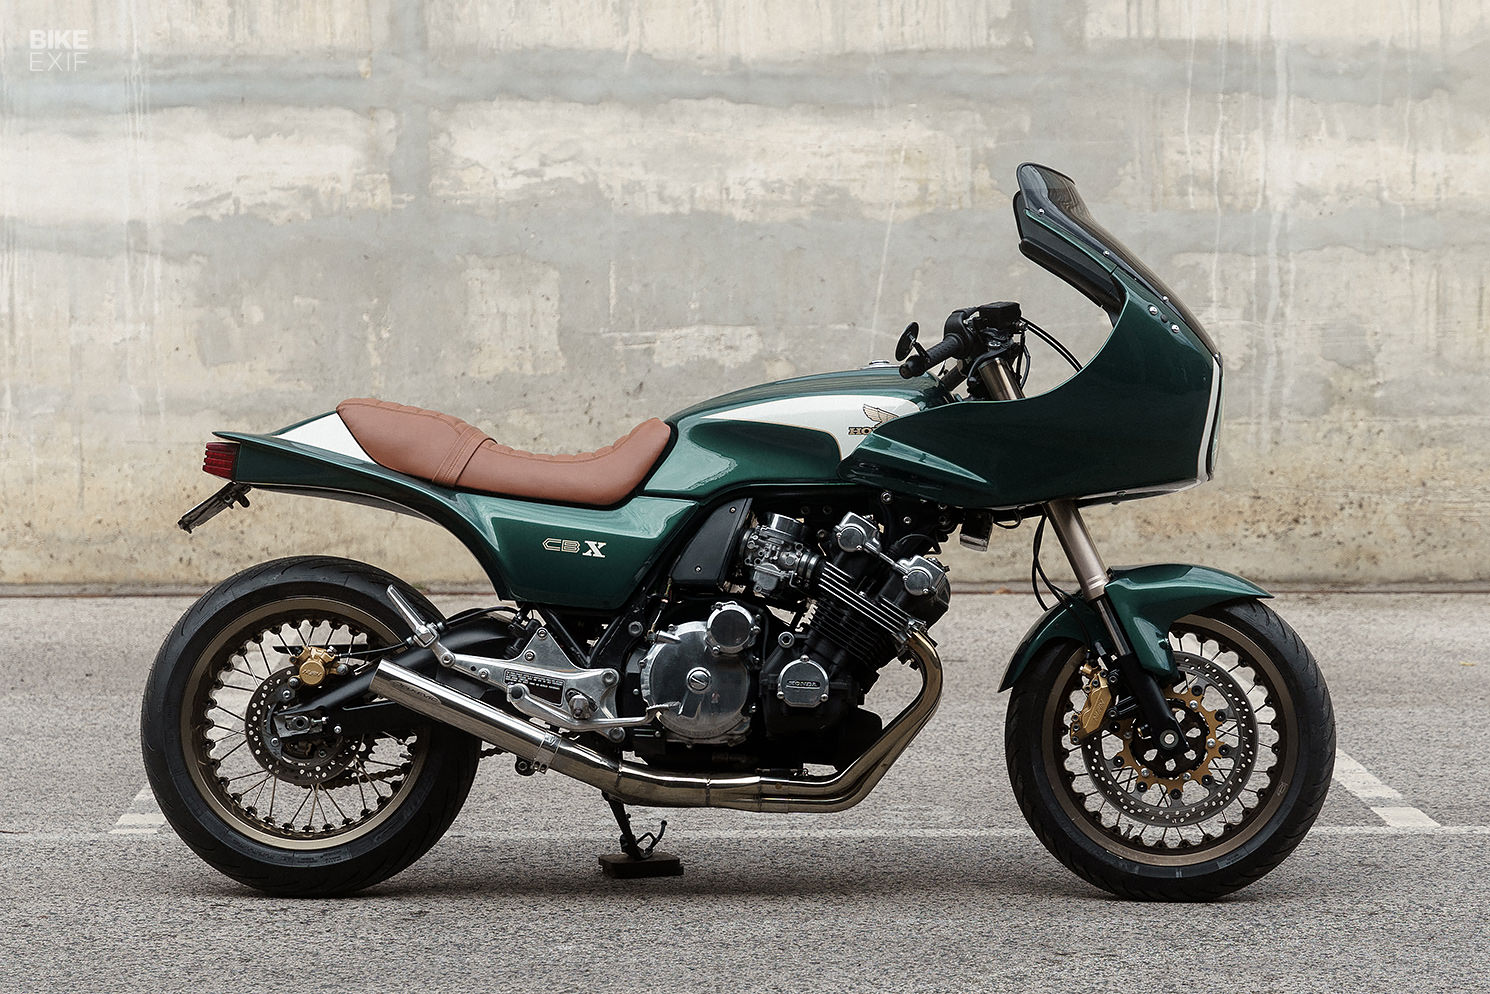 Honda CBX 250 Upgrades for West Africa - Horizons Unlimited - The HUBB